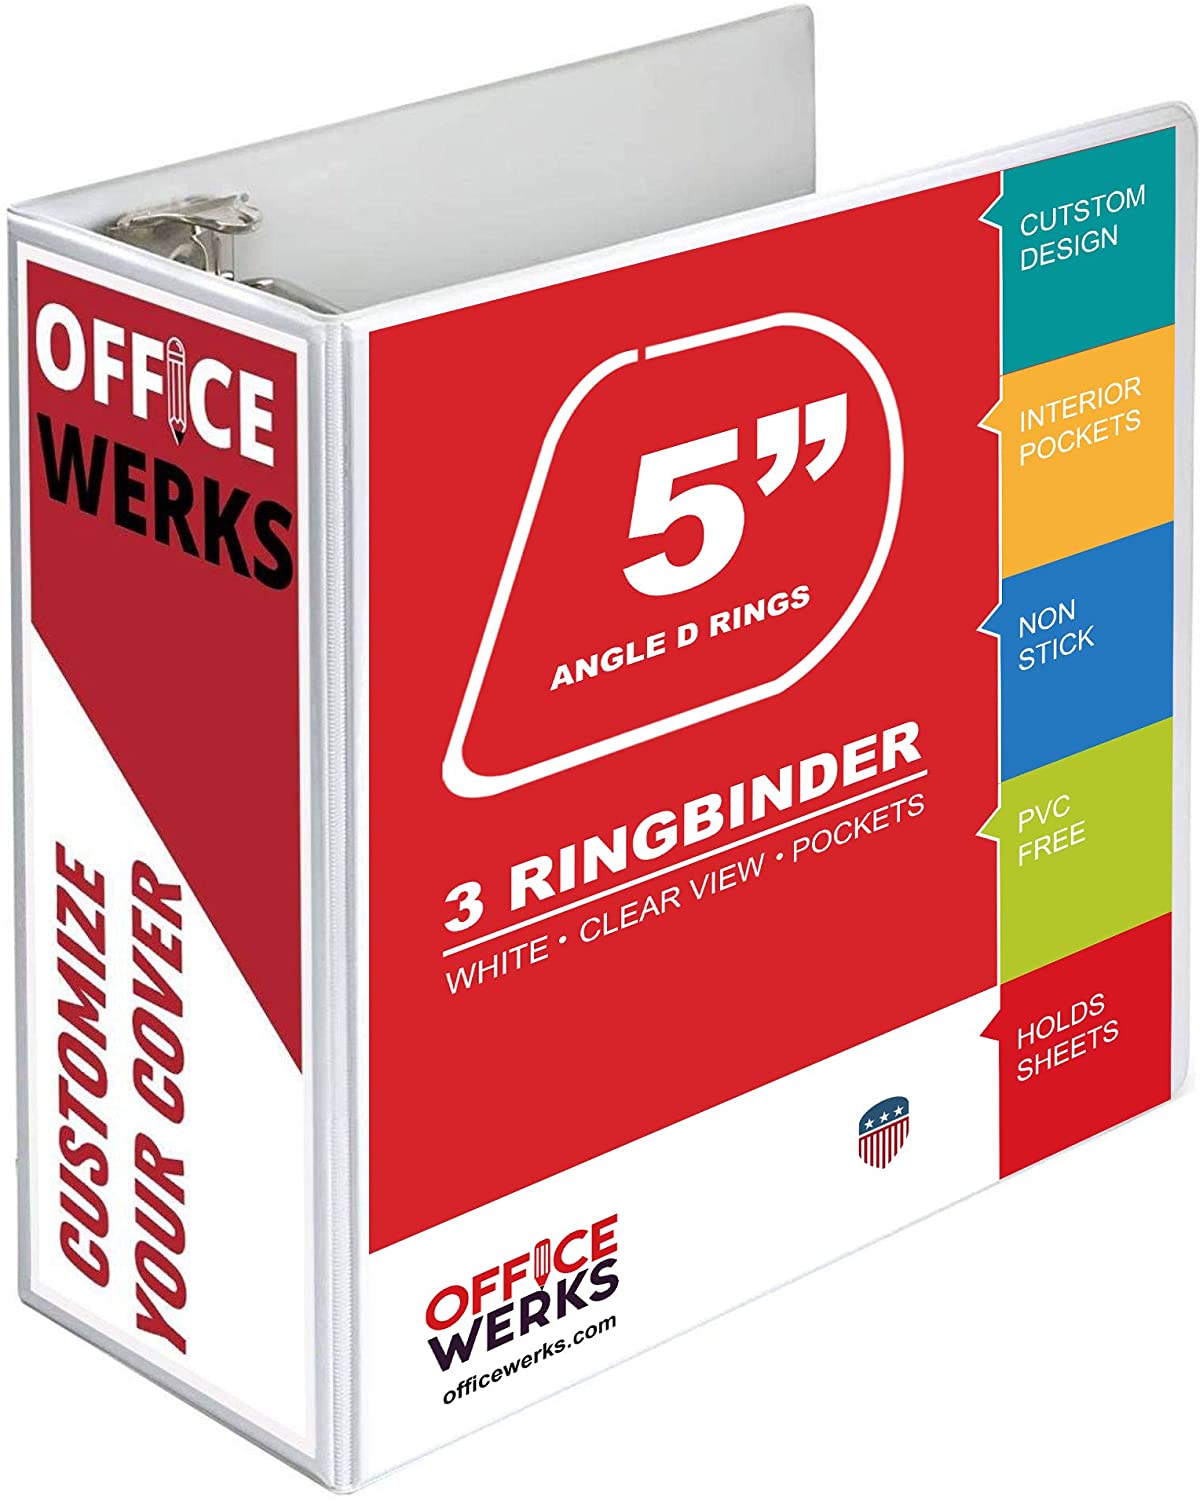 3 Ring Binder, Professional D Ring 5 Inch Binder, Clear View, With Pockets, White - 4 Pack